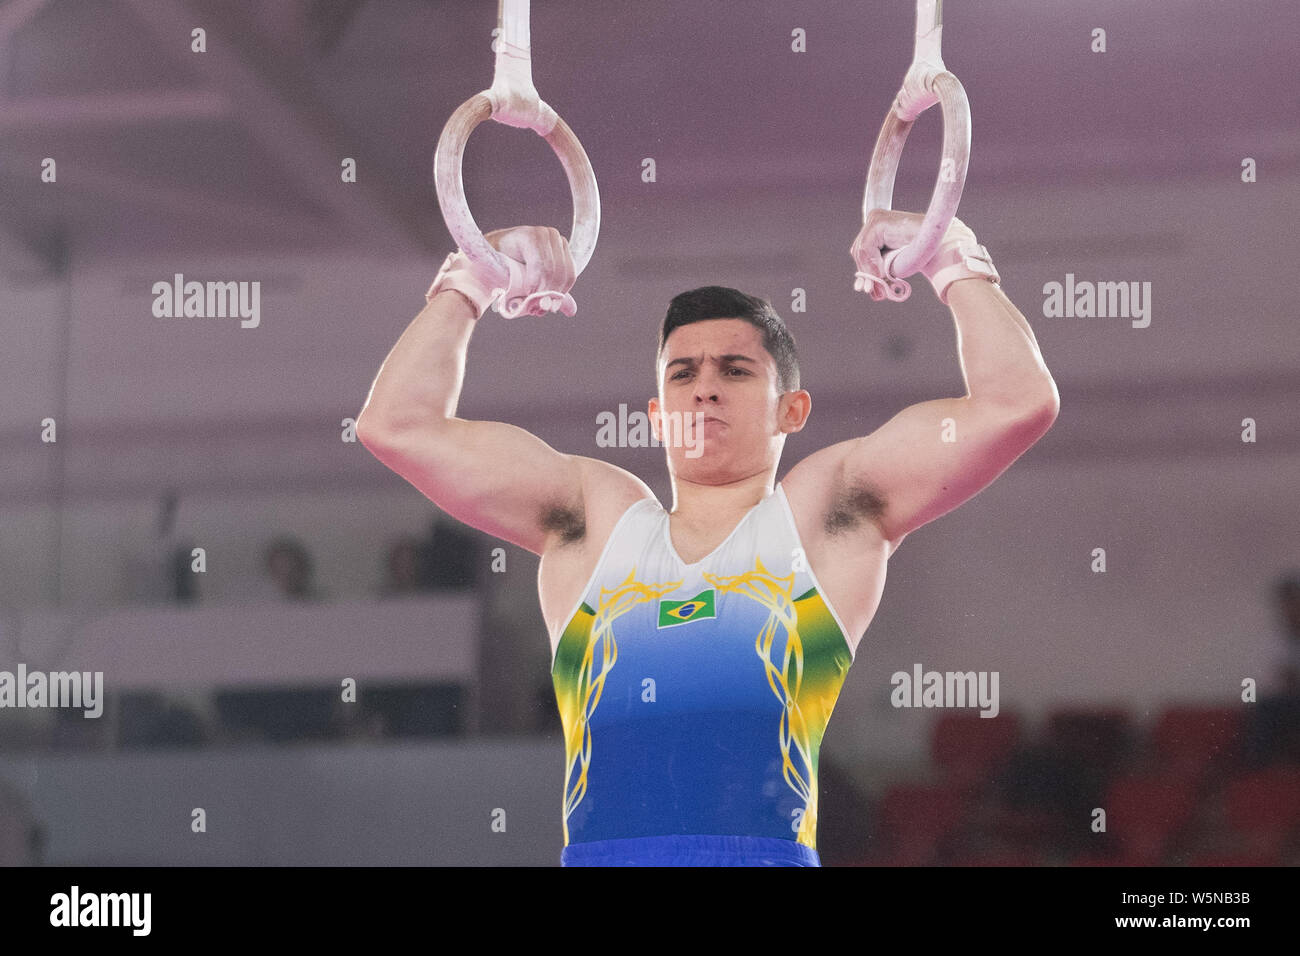 Lima, Peru. 28th July, 2019. Luis Porto (#79) of Brazil performs on the  still rings during the Pan American Games Artistic Gymnastics, Men's Team  Qualification and Final at Polideportivo Villa el Salvador